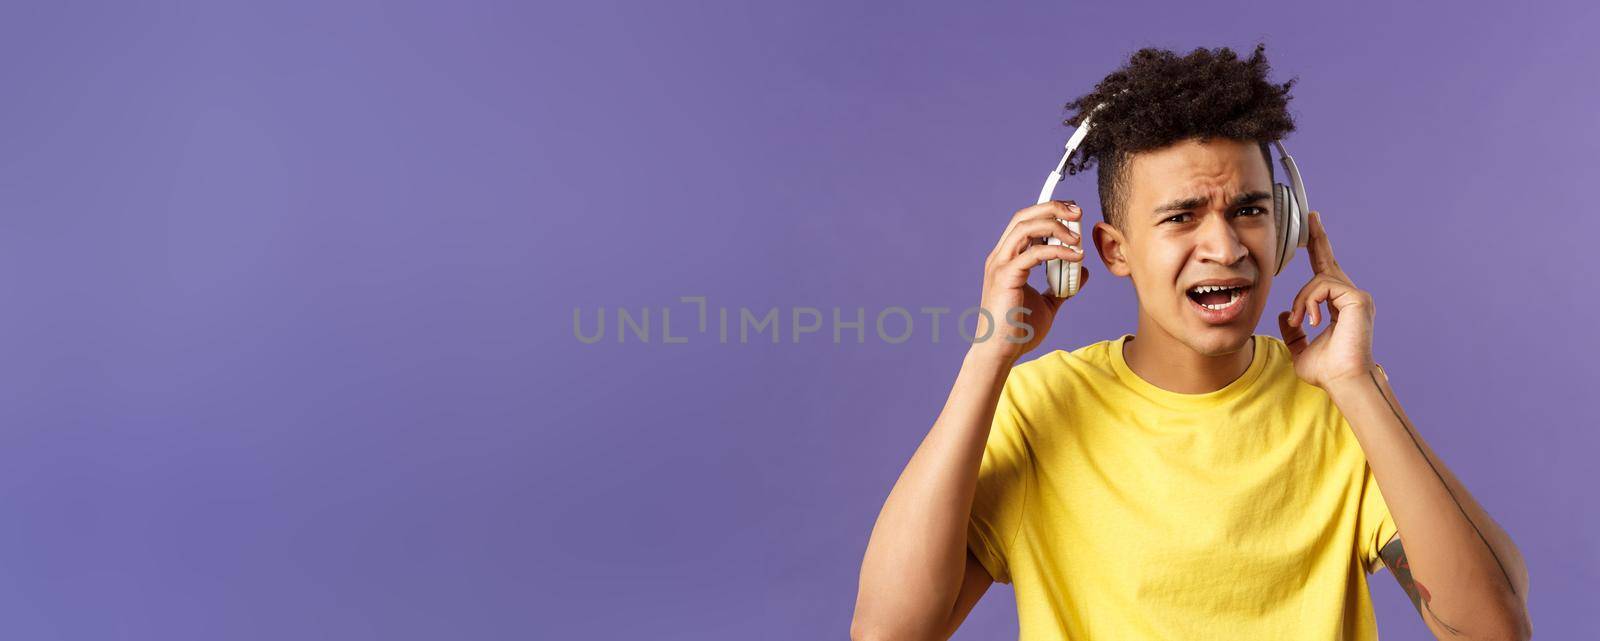 Cant hear you, repeat please. Portrait of young bothered guy interrupted of listening music, take-off headphones to answer person question, squinting look confused, purple background.